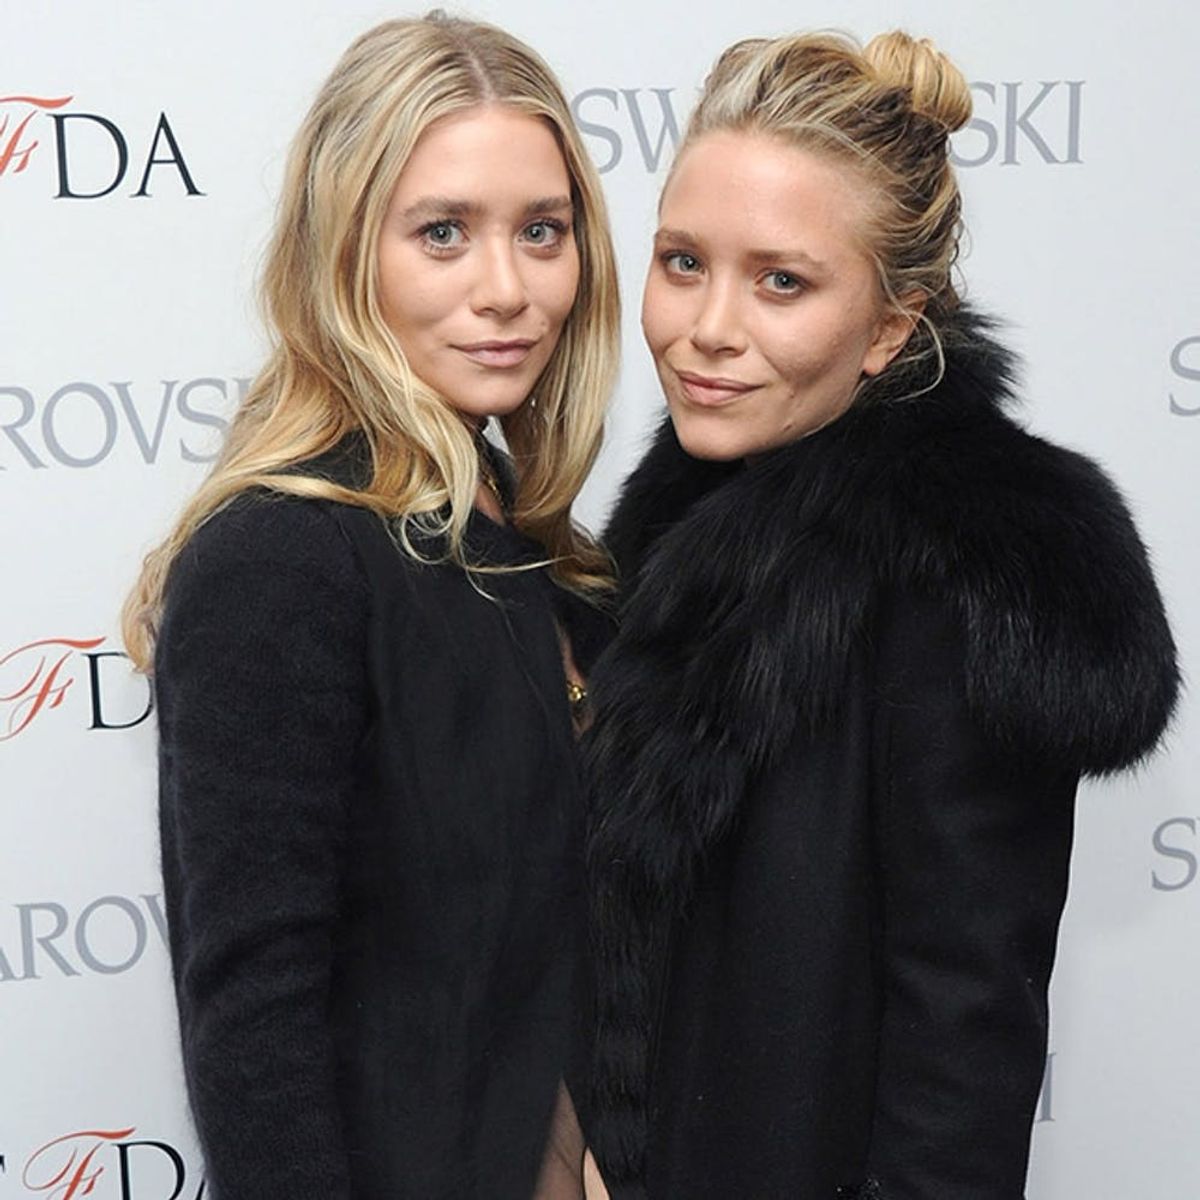 The Olsen Twins Are Launching New Hair Products Your Beauty Routine Needs